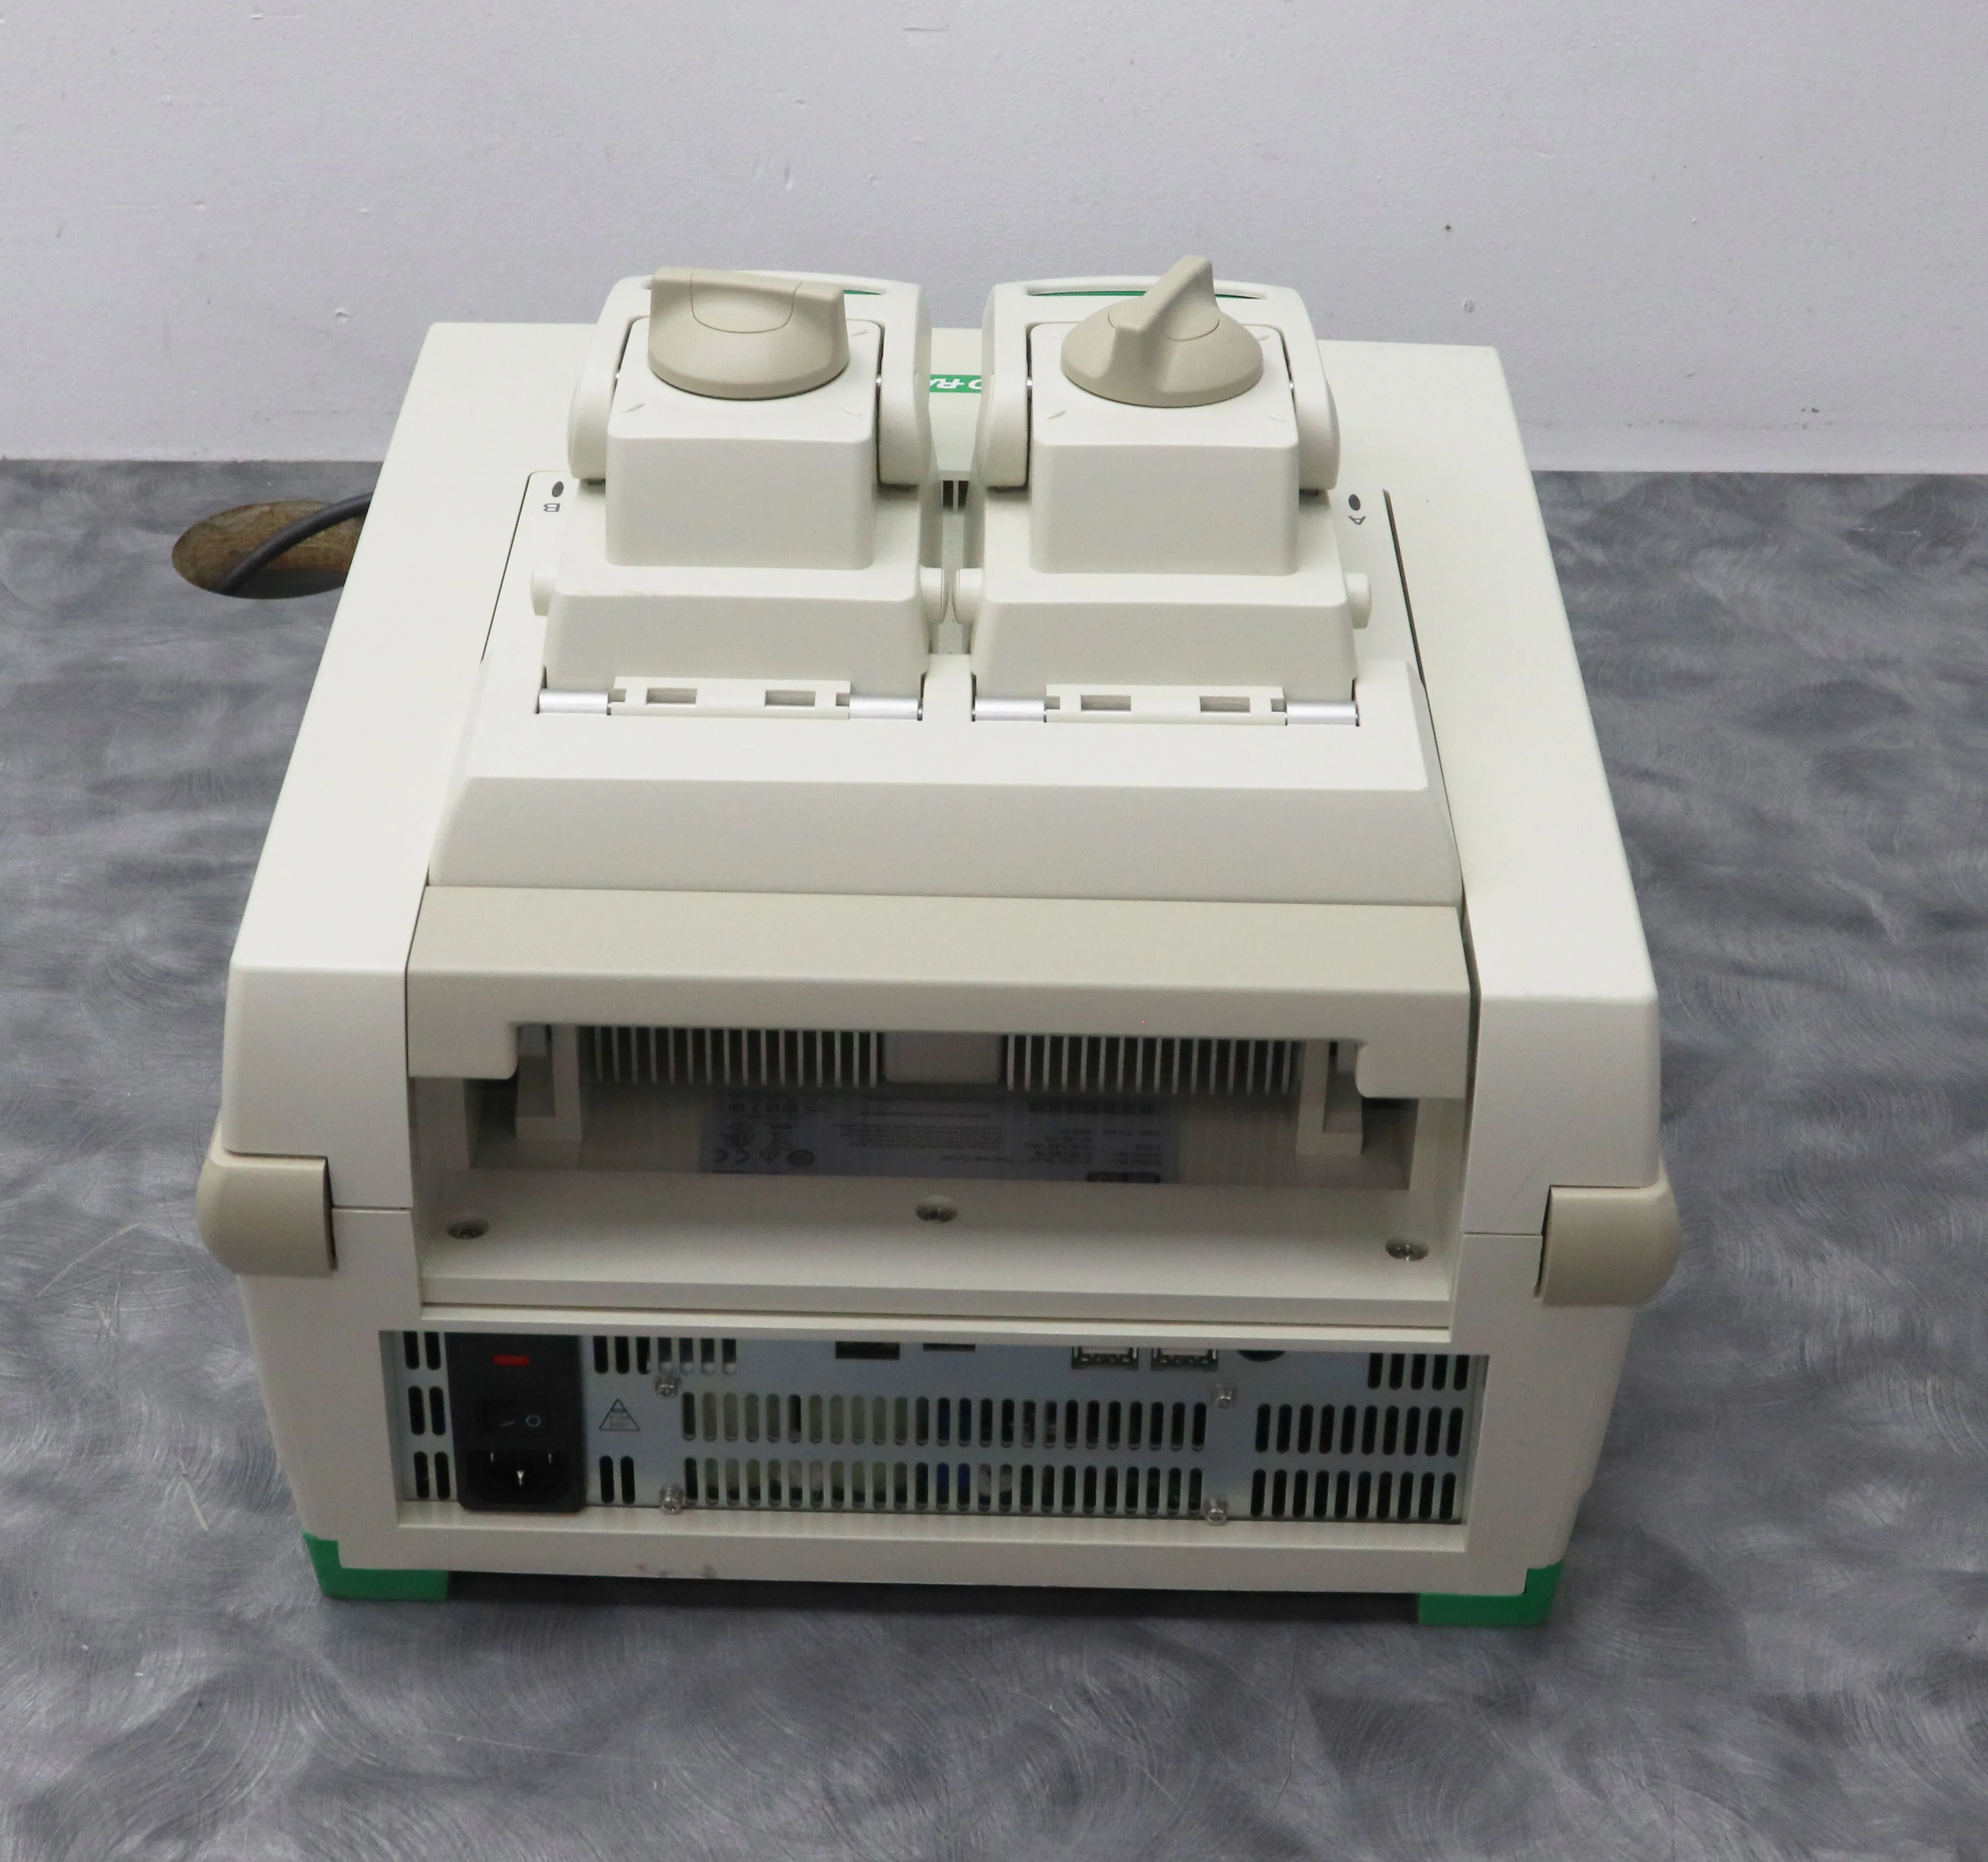 Bio-Rad C1000 Touch Thermal Cycler with Dual 48/48 Block